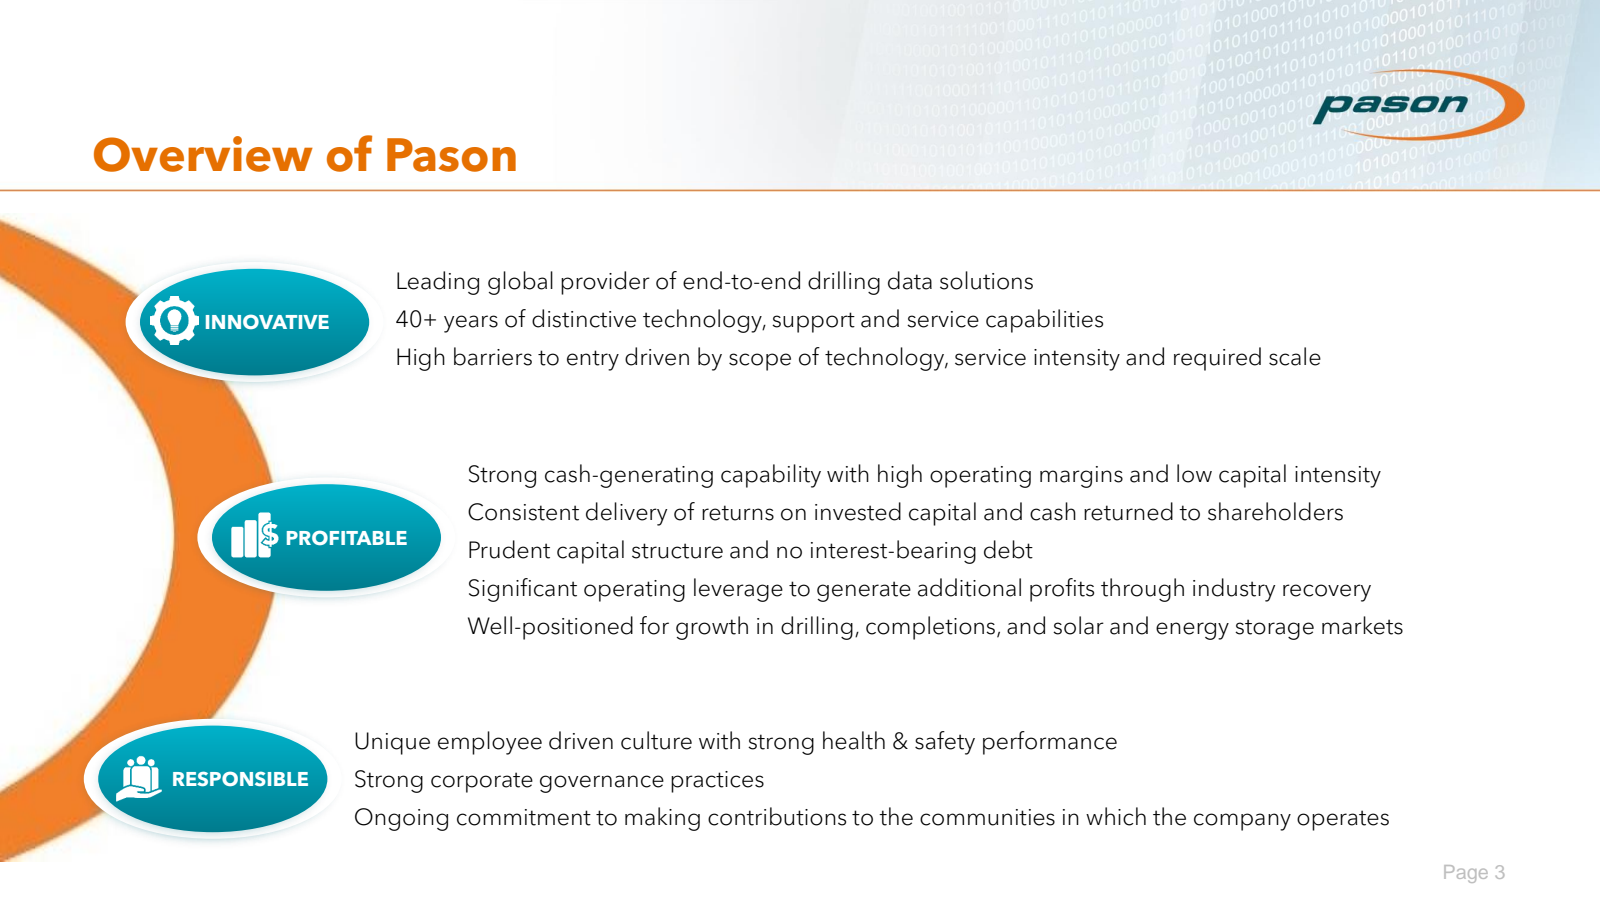 Overview of Pason 

